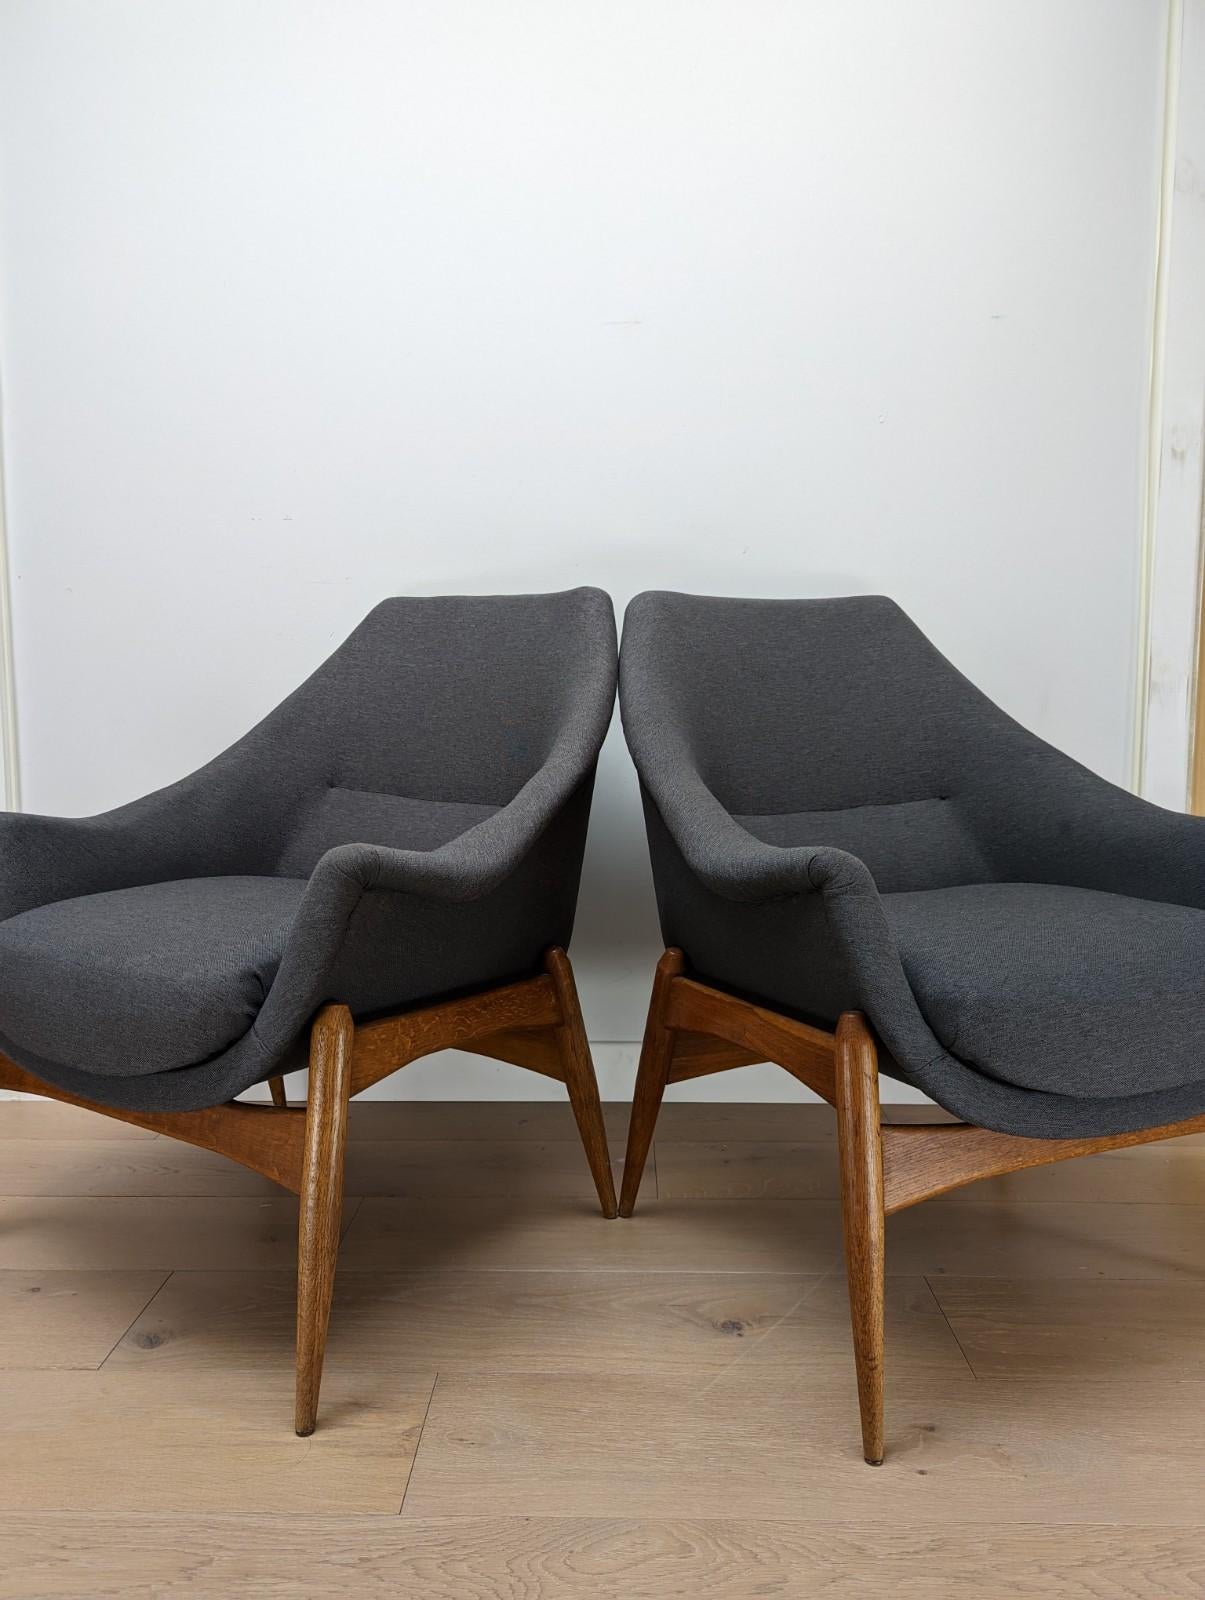 A rare pair of Julia Gaubek club chairs.

The chairs were imported from Hungary 3 years ago and they were reupholstered in a grey wool fabric. These are very much of the era with a simple but extremely stylish body sat on teak legs.

The condition